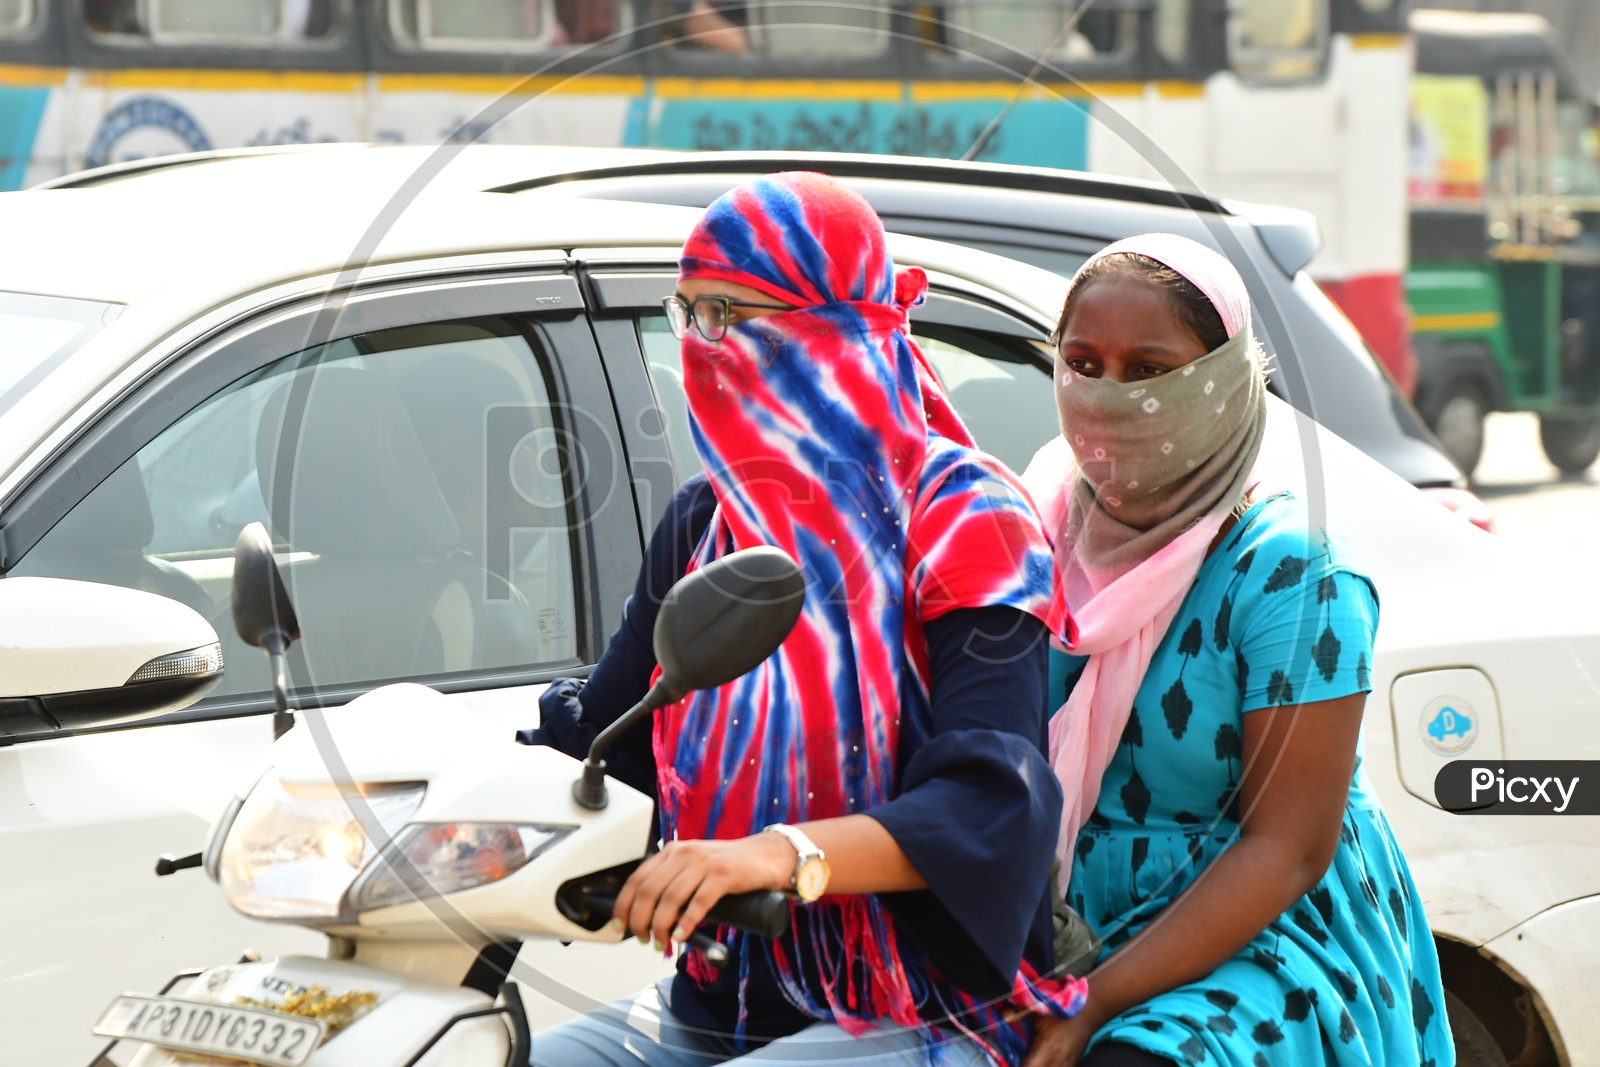 Indian women riding scooty with their faces covered with scarfs